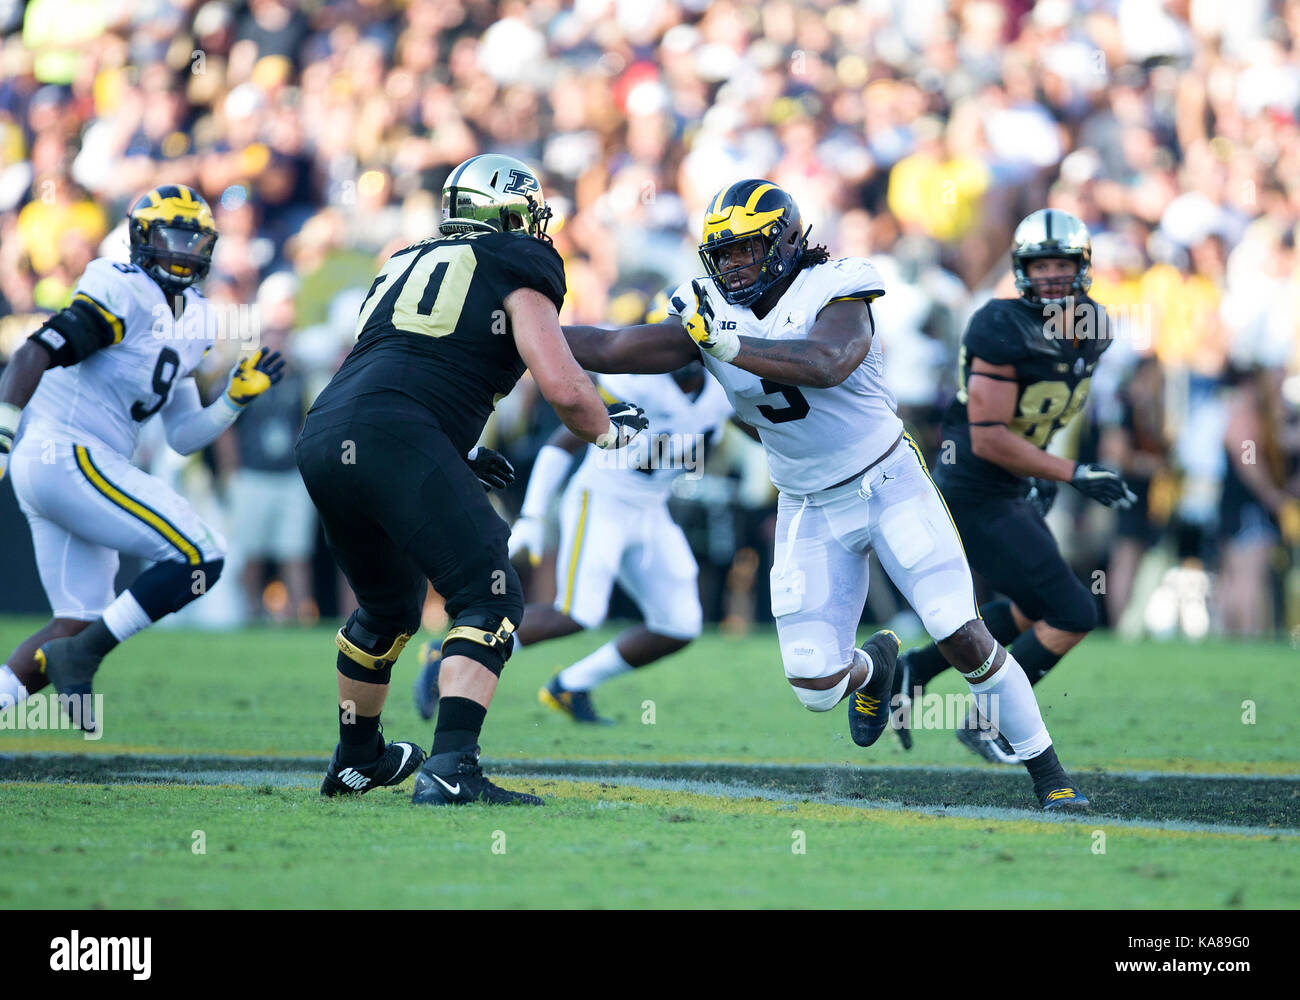 West Lafayette, Indiana, USA. 23rd Sep, 2017. Michigan defensive lineman Rashan Gary (3) and Purdue offensive lineman David Steinmetz (70) battle at the line of scrimmage during NCAA football game action between the Michigan Wolverines and the Purdue Boilermakers at Ross-Ade Stadium in West Lafayette, Indiana. Michigan defeated Purdue 28-10. John Mersits/CSM/Alamy Live News Stock Photo